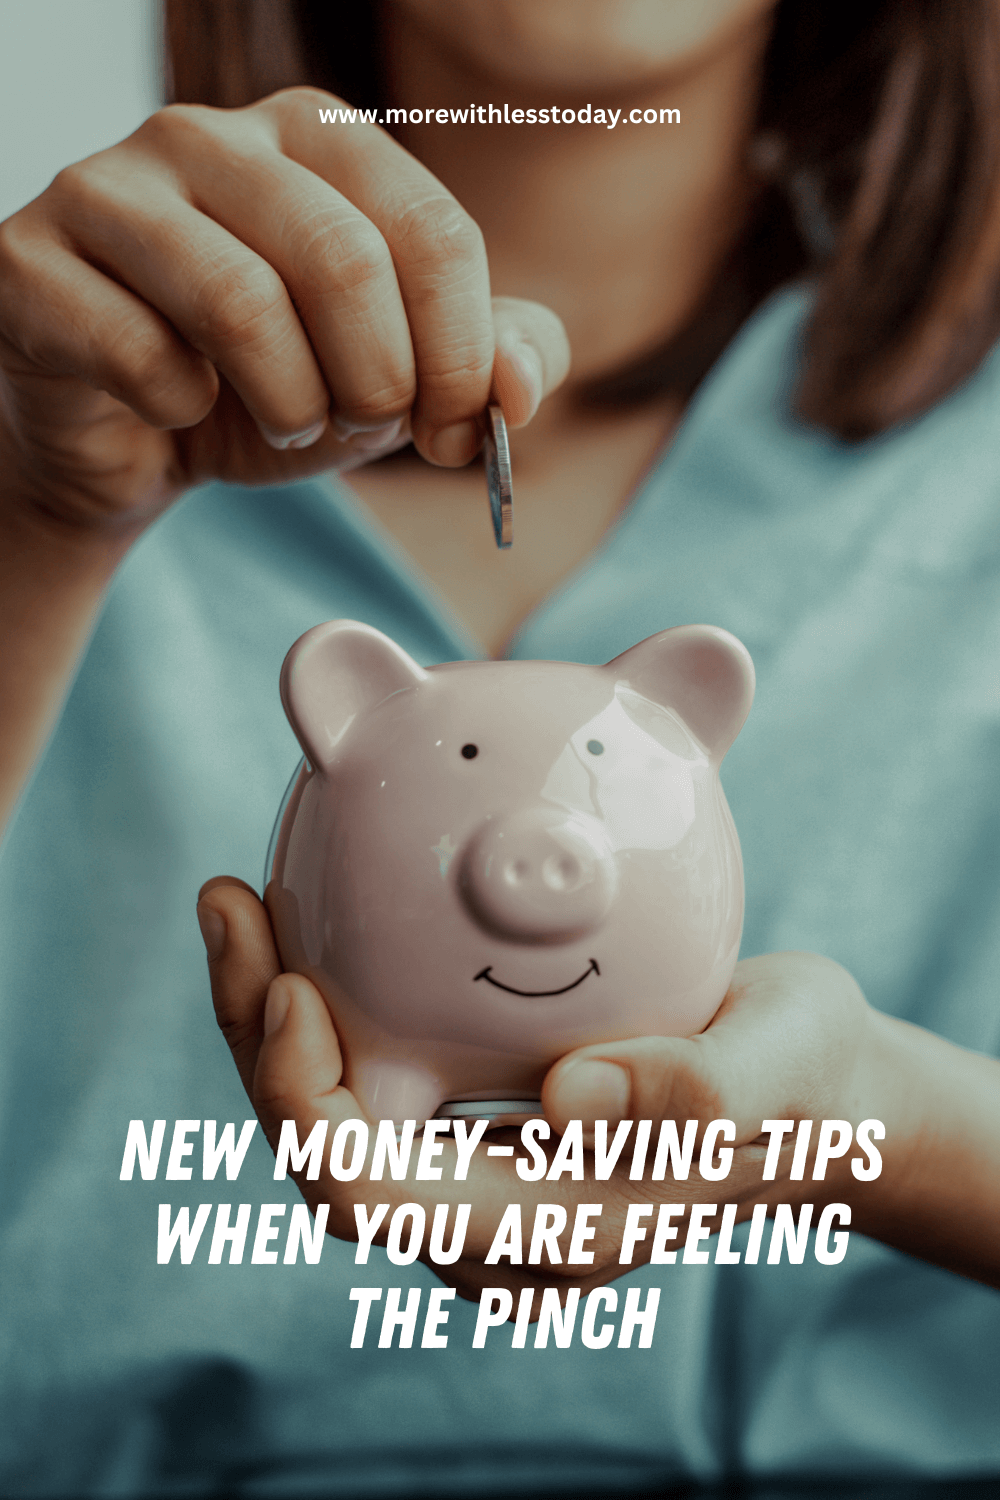 New Money-Saving Tips When You Are Feeling the Pinch - PIN